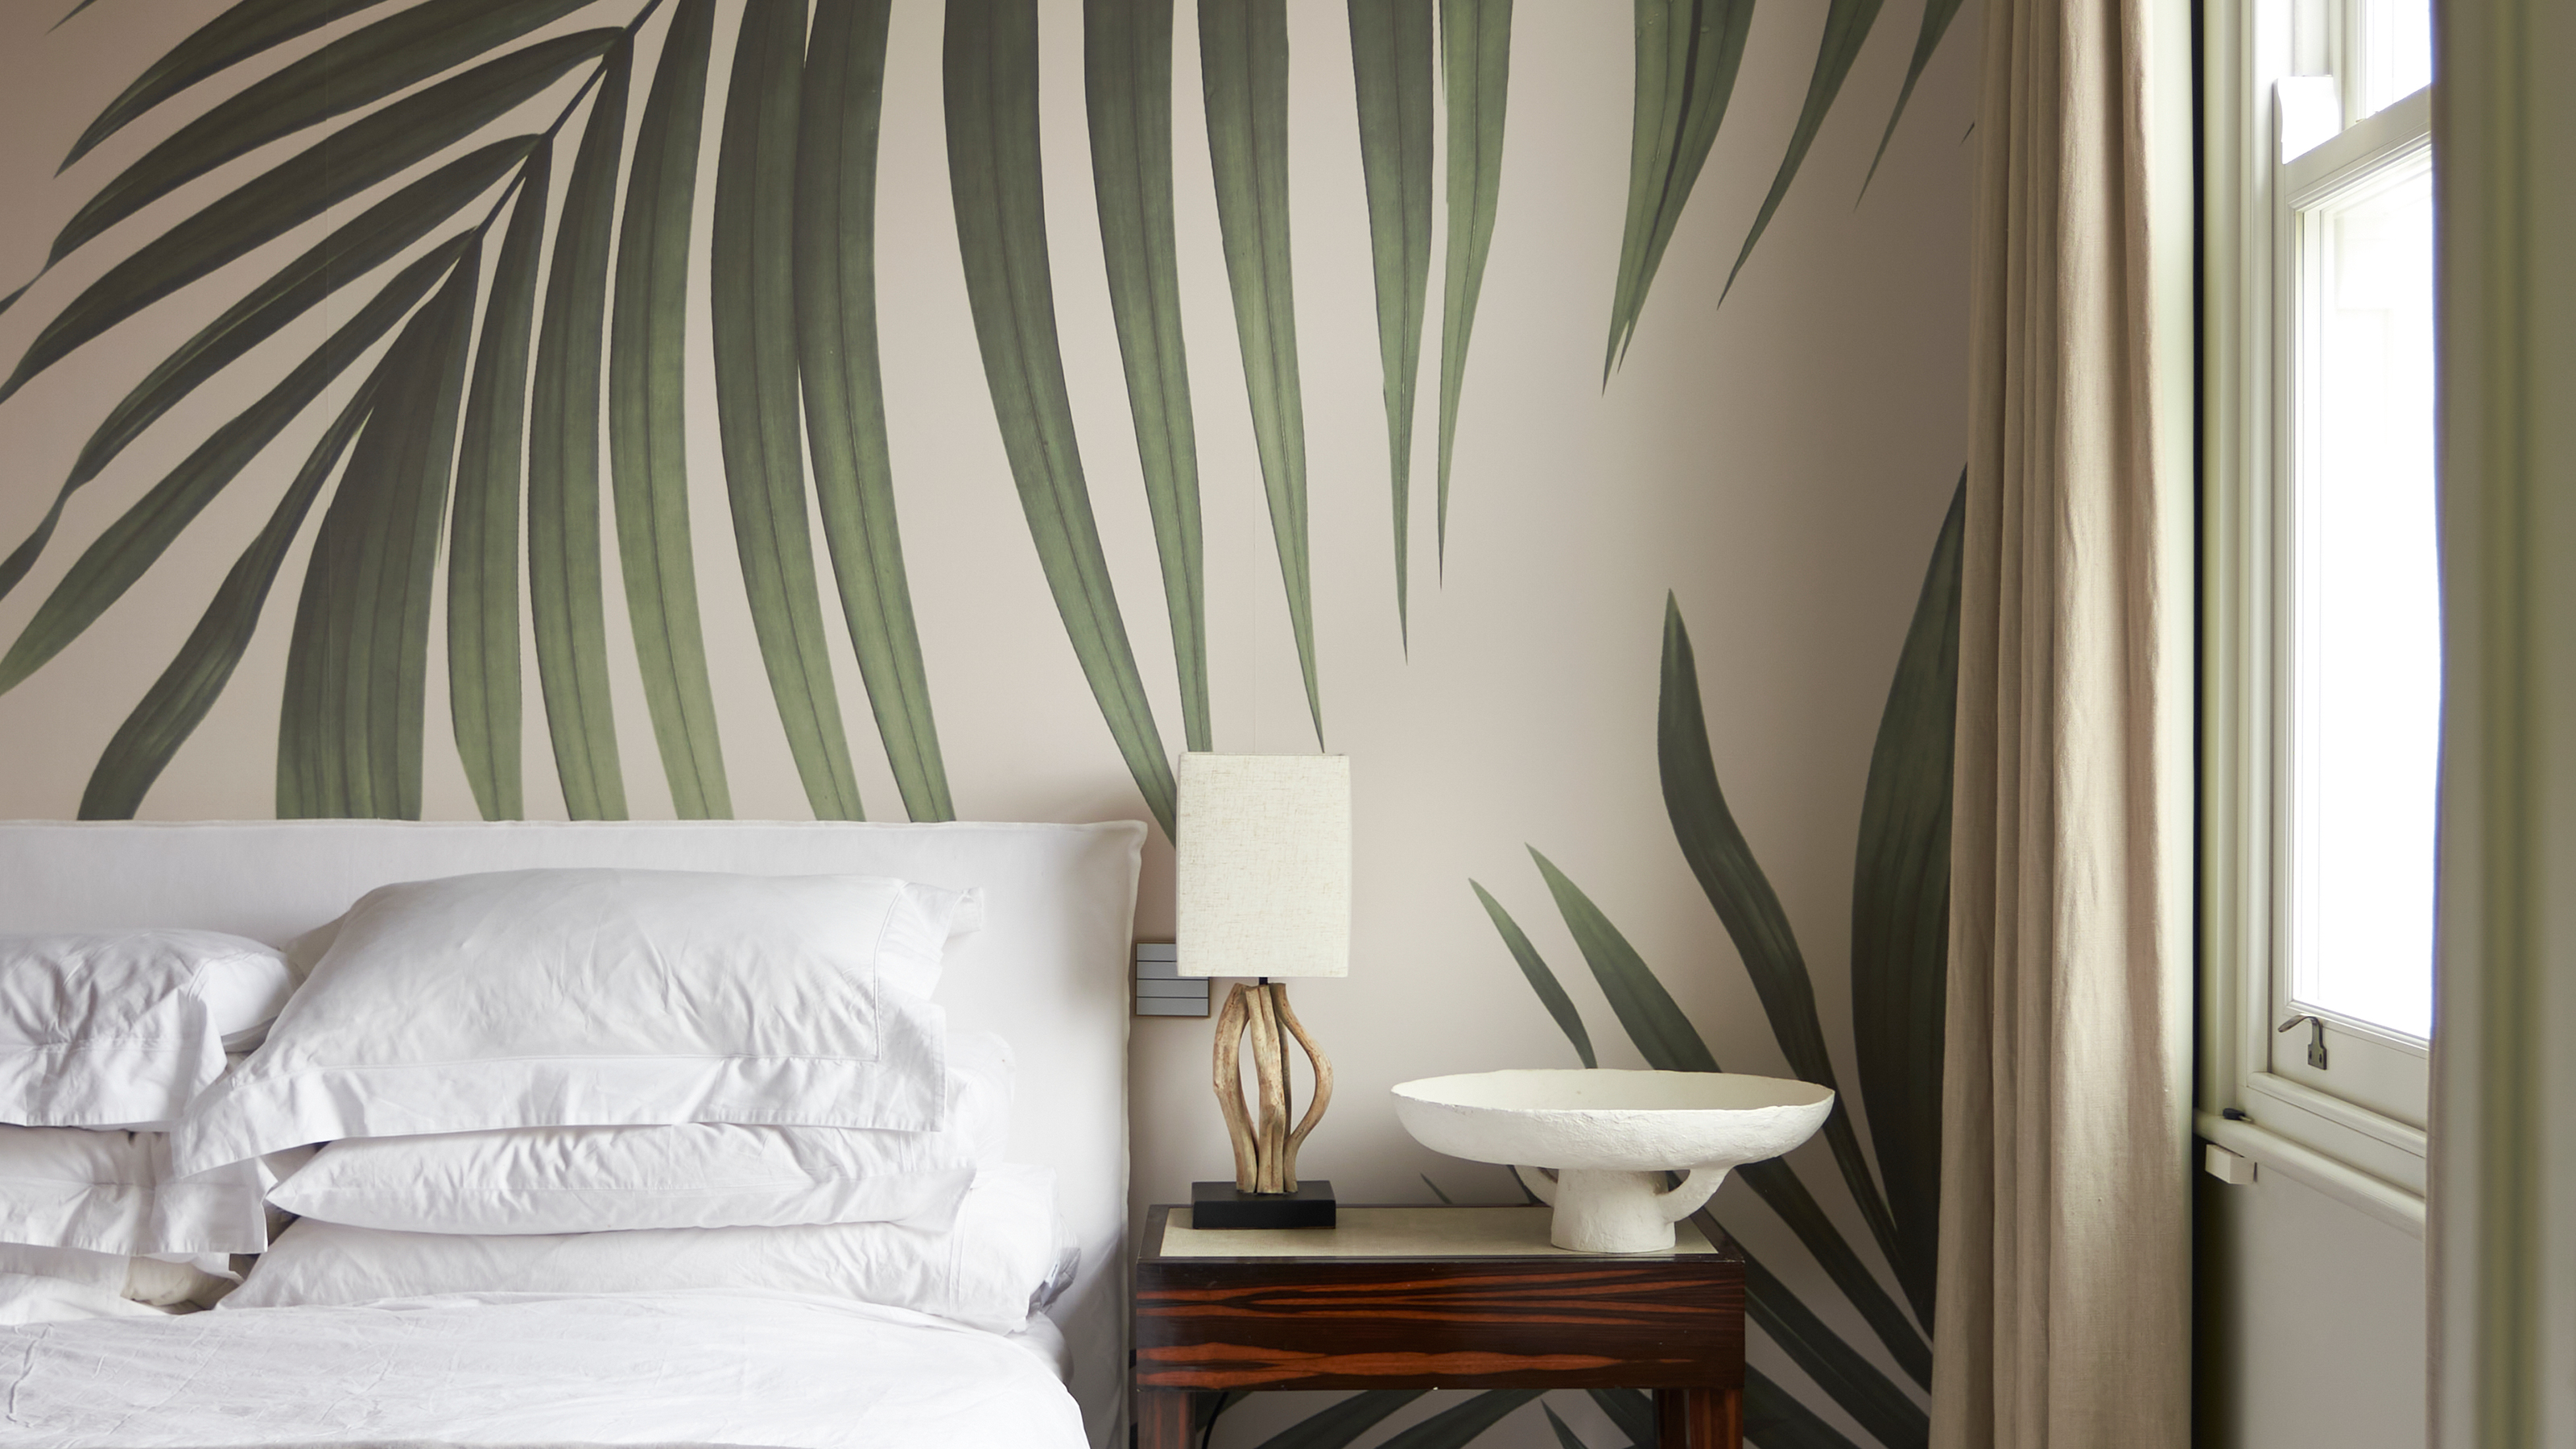 Wallpaper trends 2022: In-style designs for bedroom and living